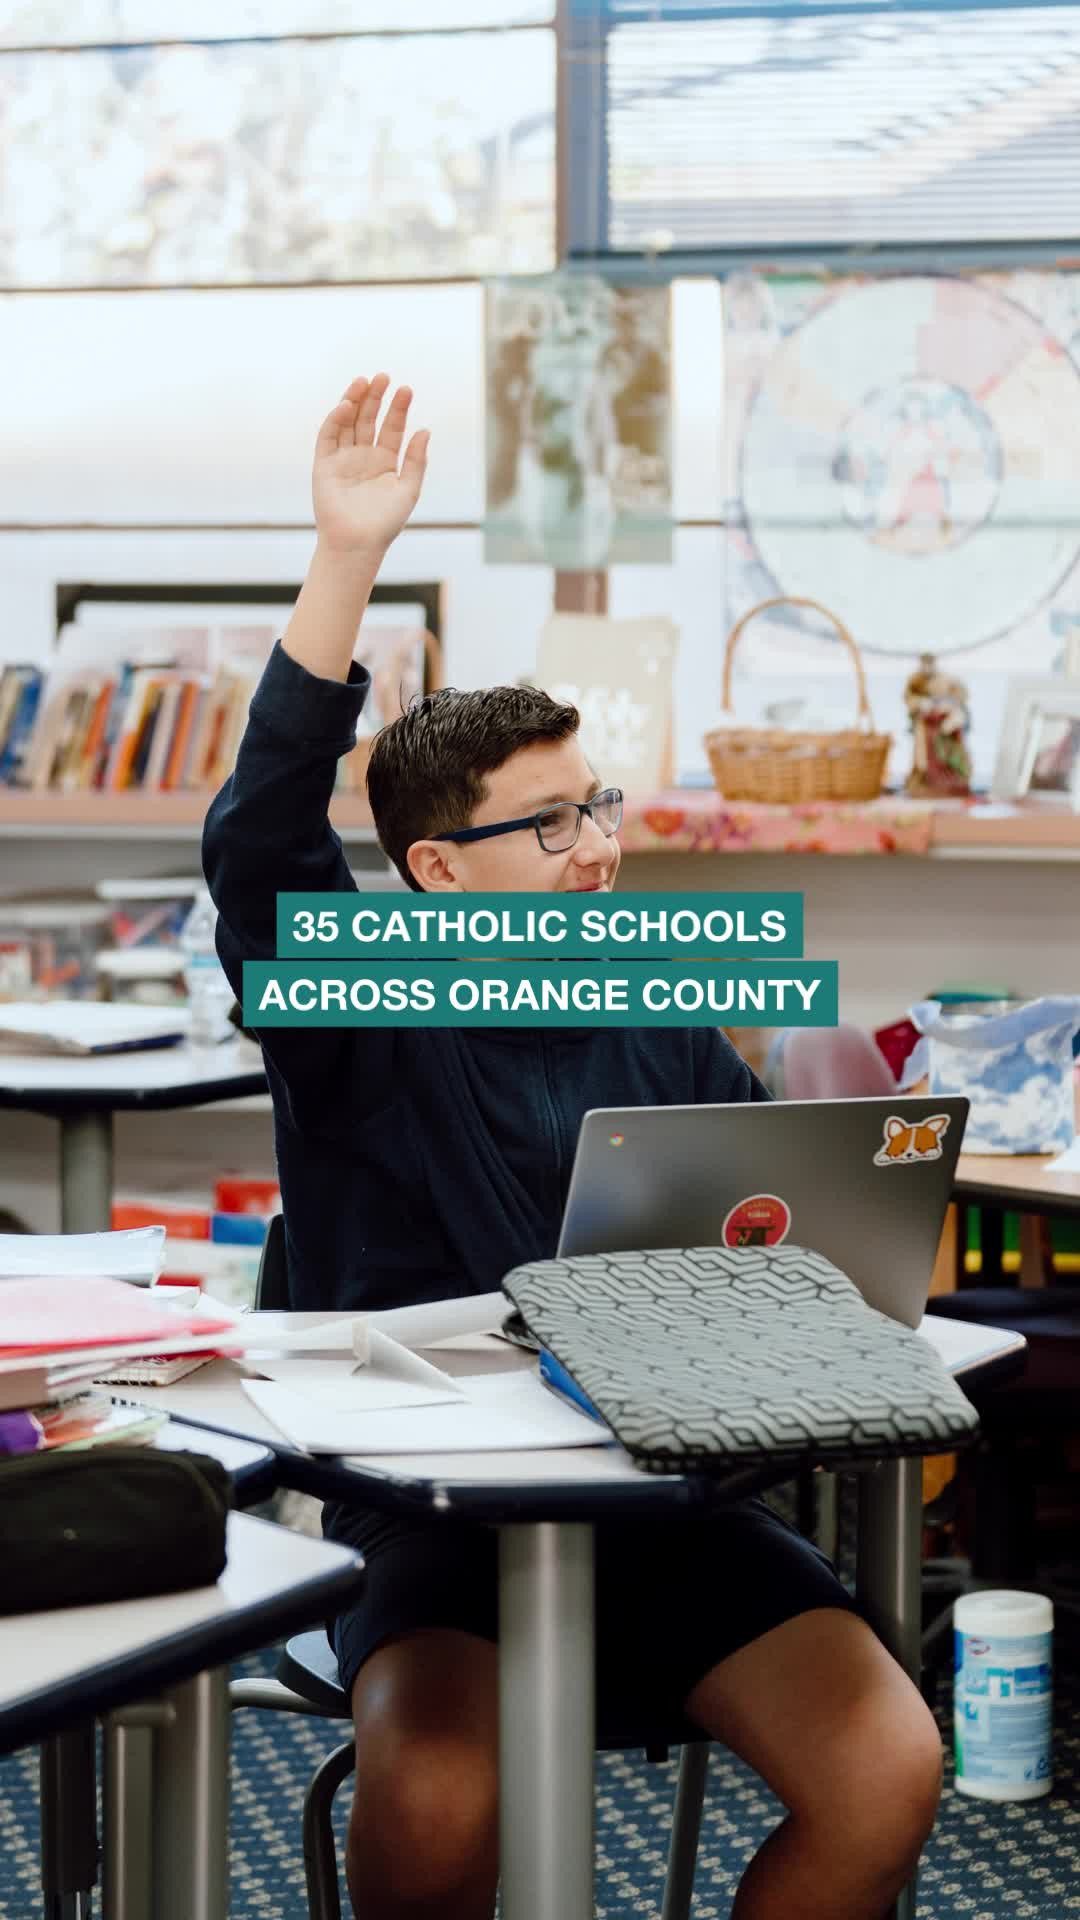 Day 3 of #CatholicSchoolsWeek! Here's to all of our students, teachers, and staff who are part of Catholic education across our 35 schools throughout Orange County. 🎉⁠
⁠
Tag your catholic school below! ⁠
⁠
(For more information on our schools, visit the link in bio)